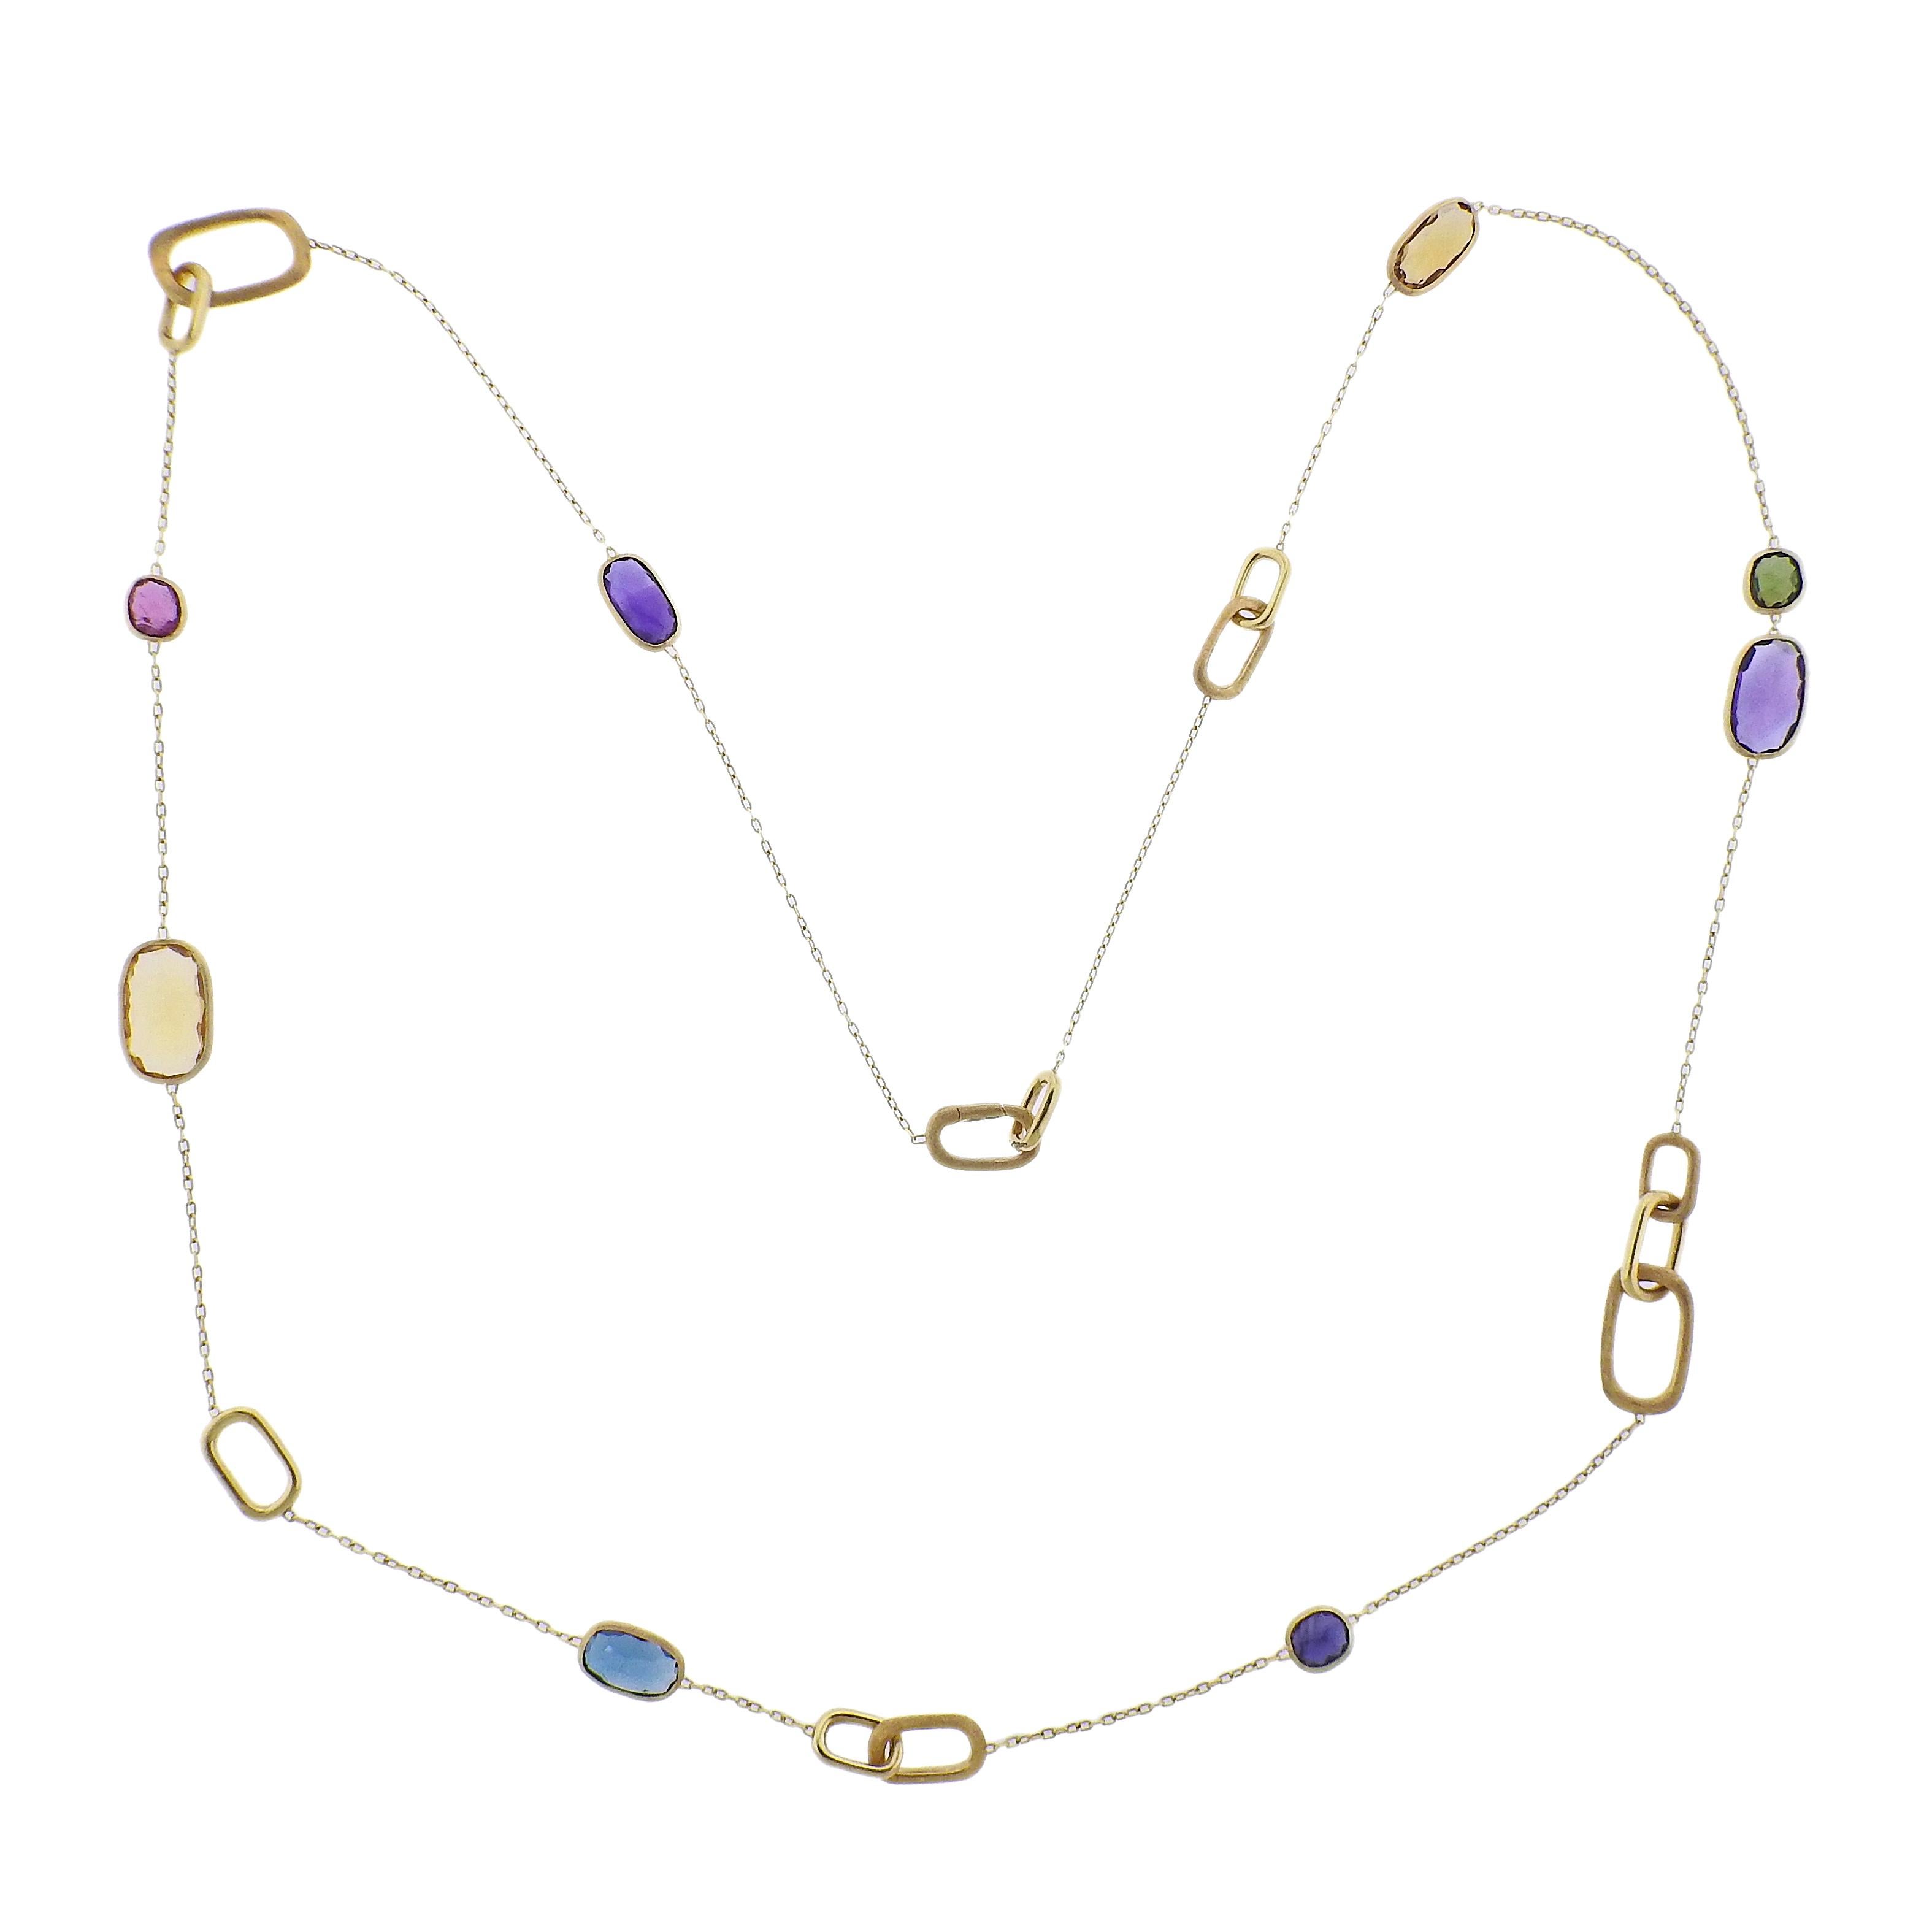 Marco Bicego Murano collection 18K gold link chain long necklace set with Amethyst, Tourmaline, Peridot, Citrine and Topaz gemstones. Neckalce is 36